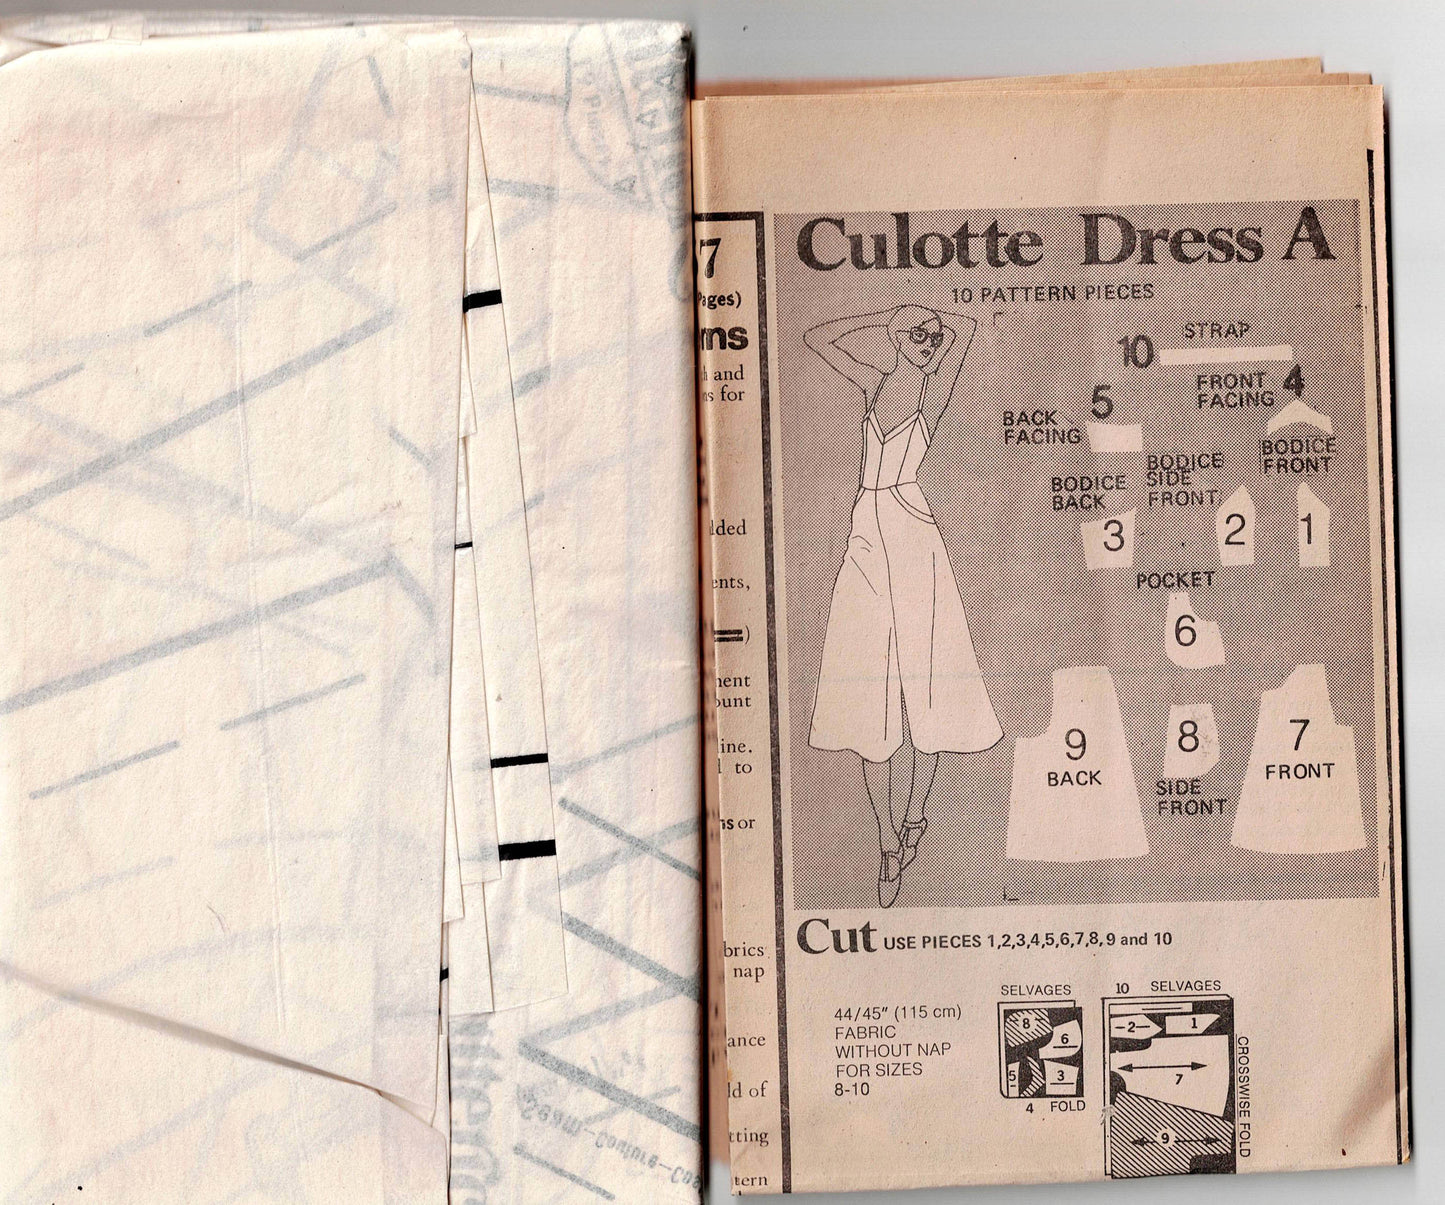 Butterick 5257 JANE TISE Womens Nautical Style Summer Sundress or Culotte Dress / Jumpsuit 1970s Vintage Sewing Pattern Size 10 Bust 32.5 inches UNCUT Factory Folded